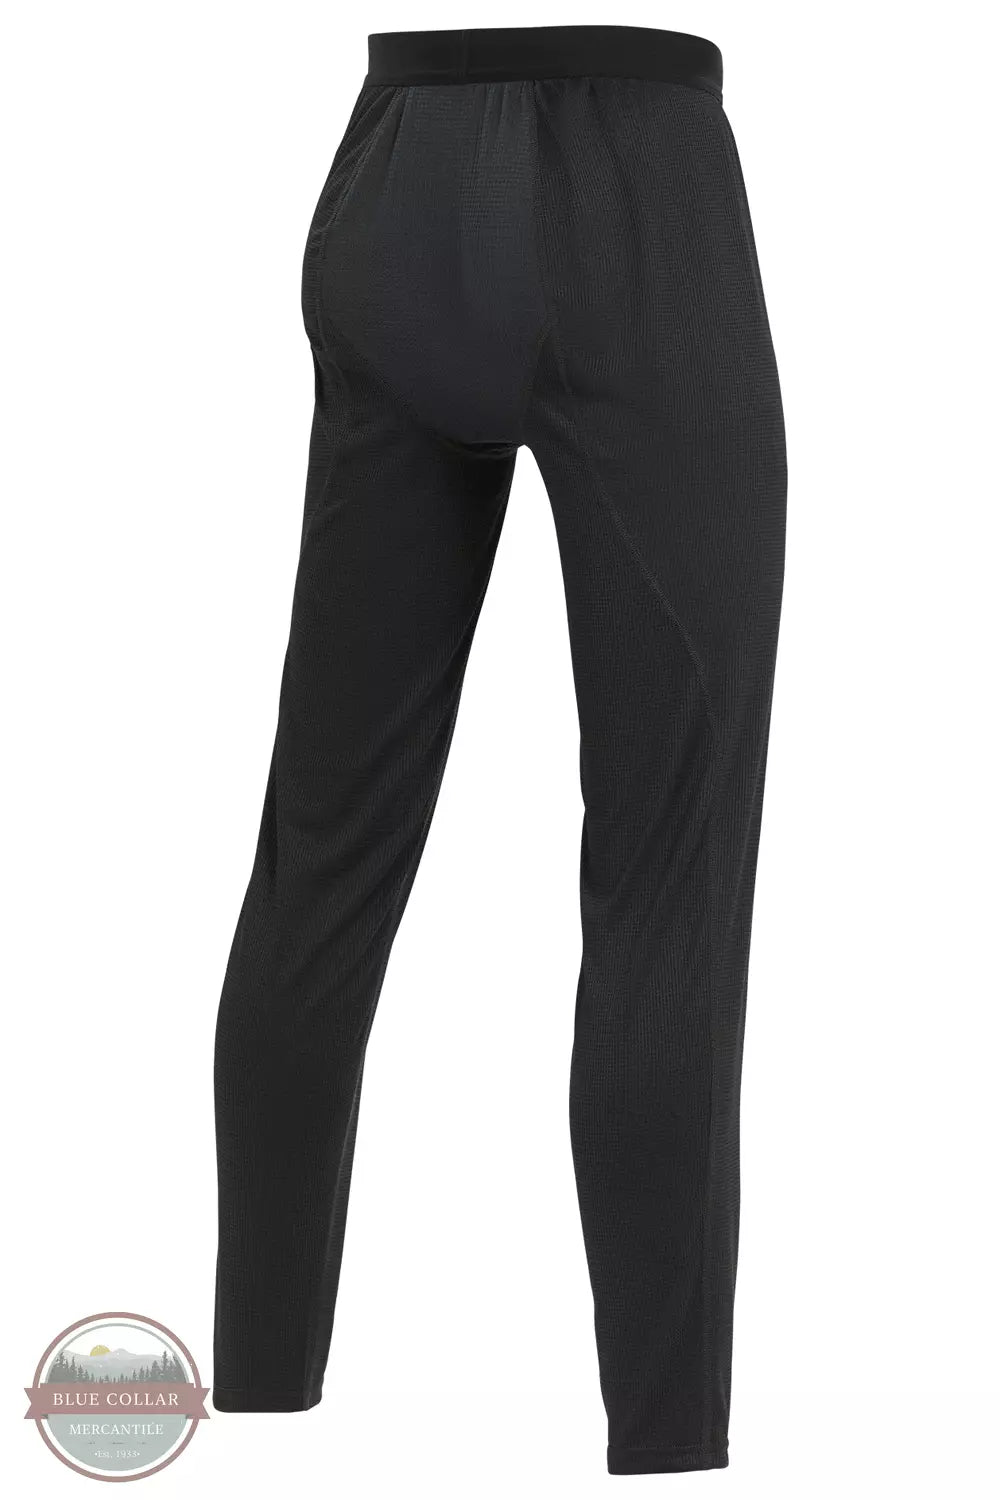 Carhartt UM0224M-BLK Force Midweight Micro-Grid Base Layer Pants in Black Back View